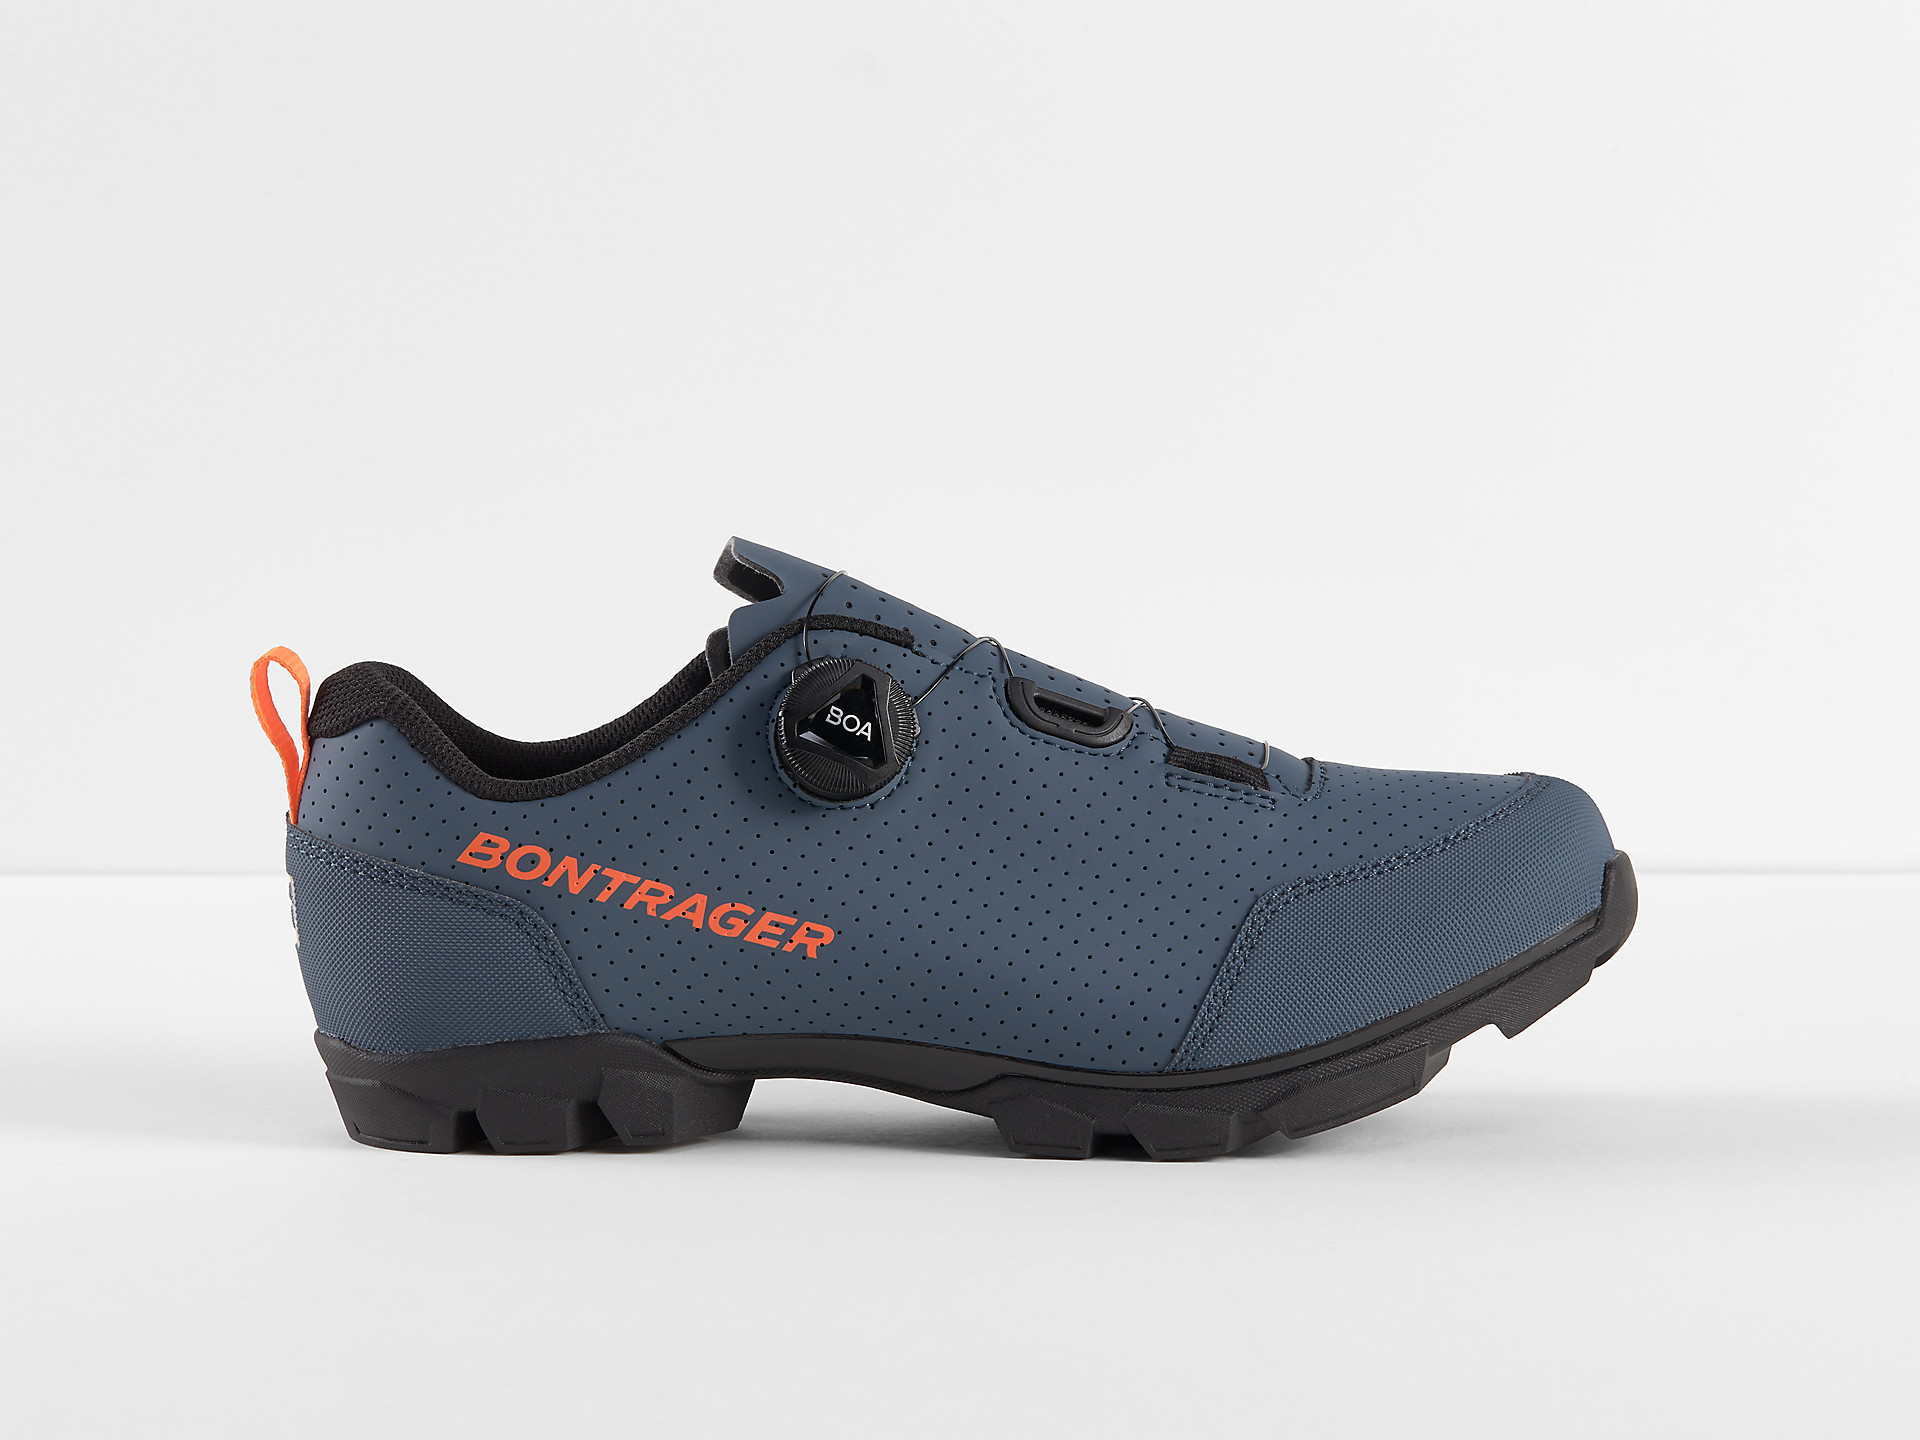 <a href="https://cycles-clement.be/product/bont-chaussures-evoke-44-black/">BONT CHAUSSURES EVOKE 44 BLACK</a>